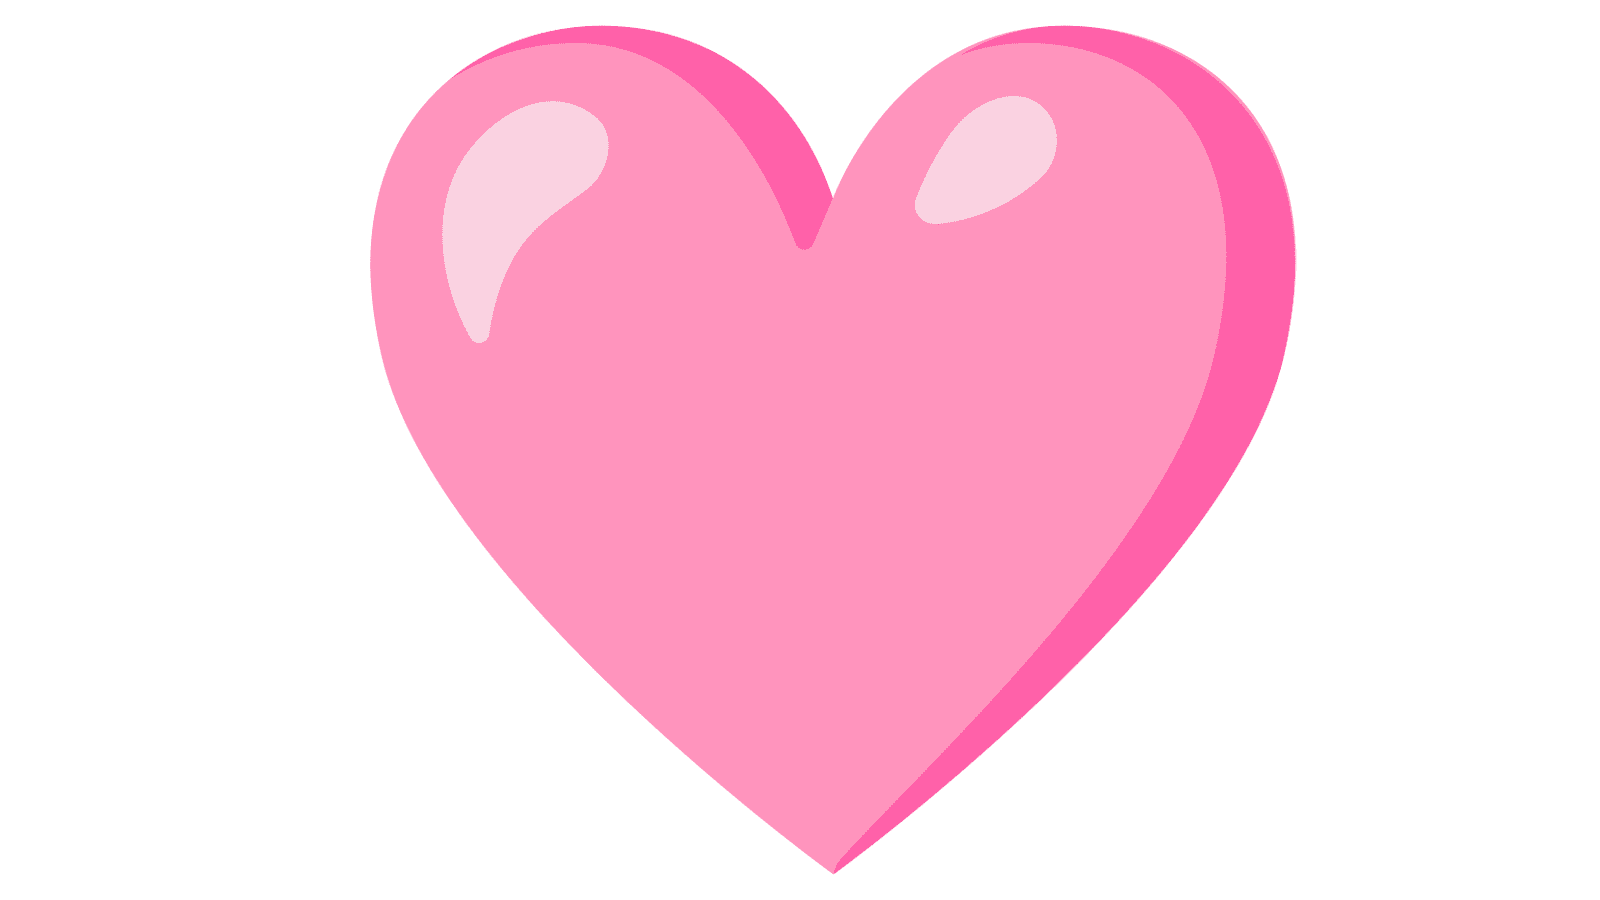 St. Valentine's Day Emoji - what it means and how to use it.